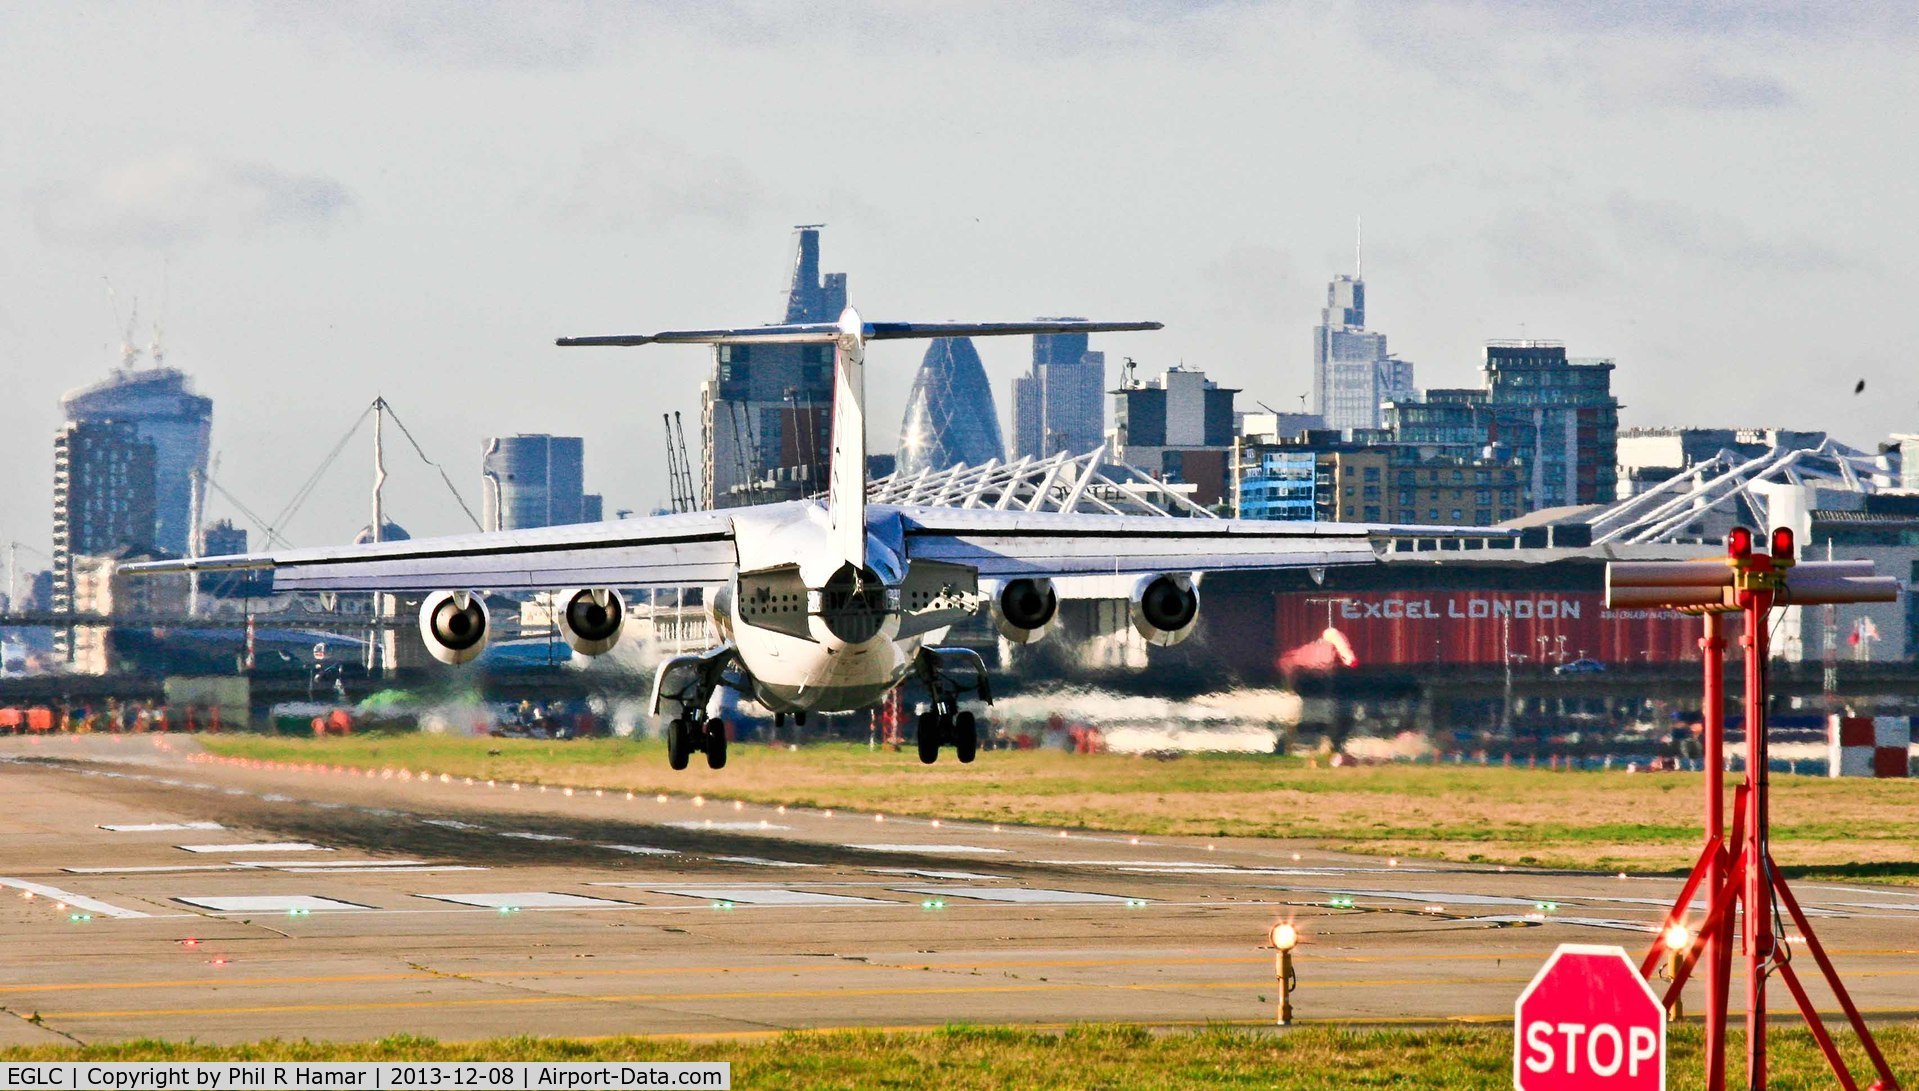 London City Airport, London, England United Kingdom (EGLC) - Swiss Air is the first to land on 27 this Sunday (LCY).